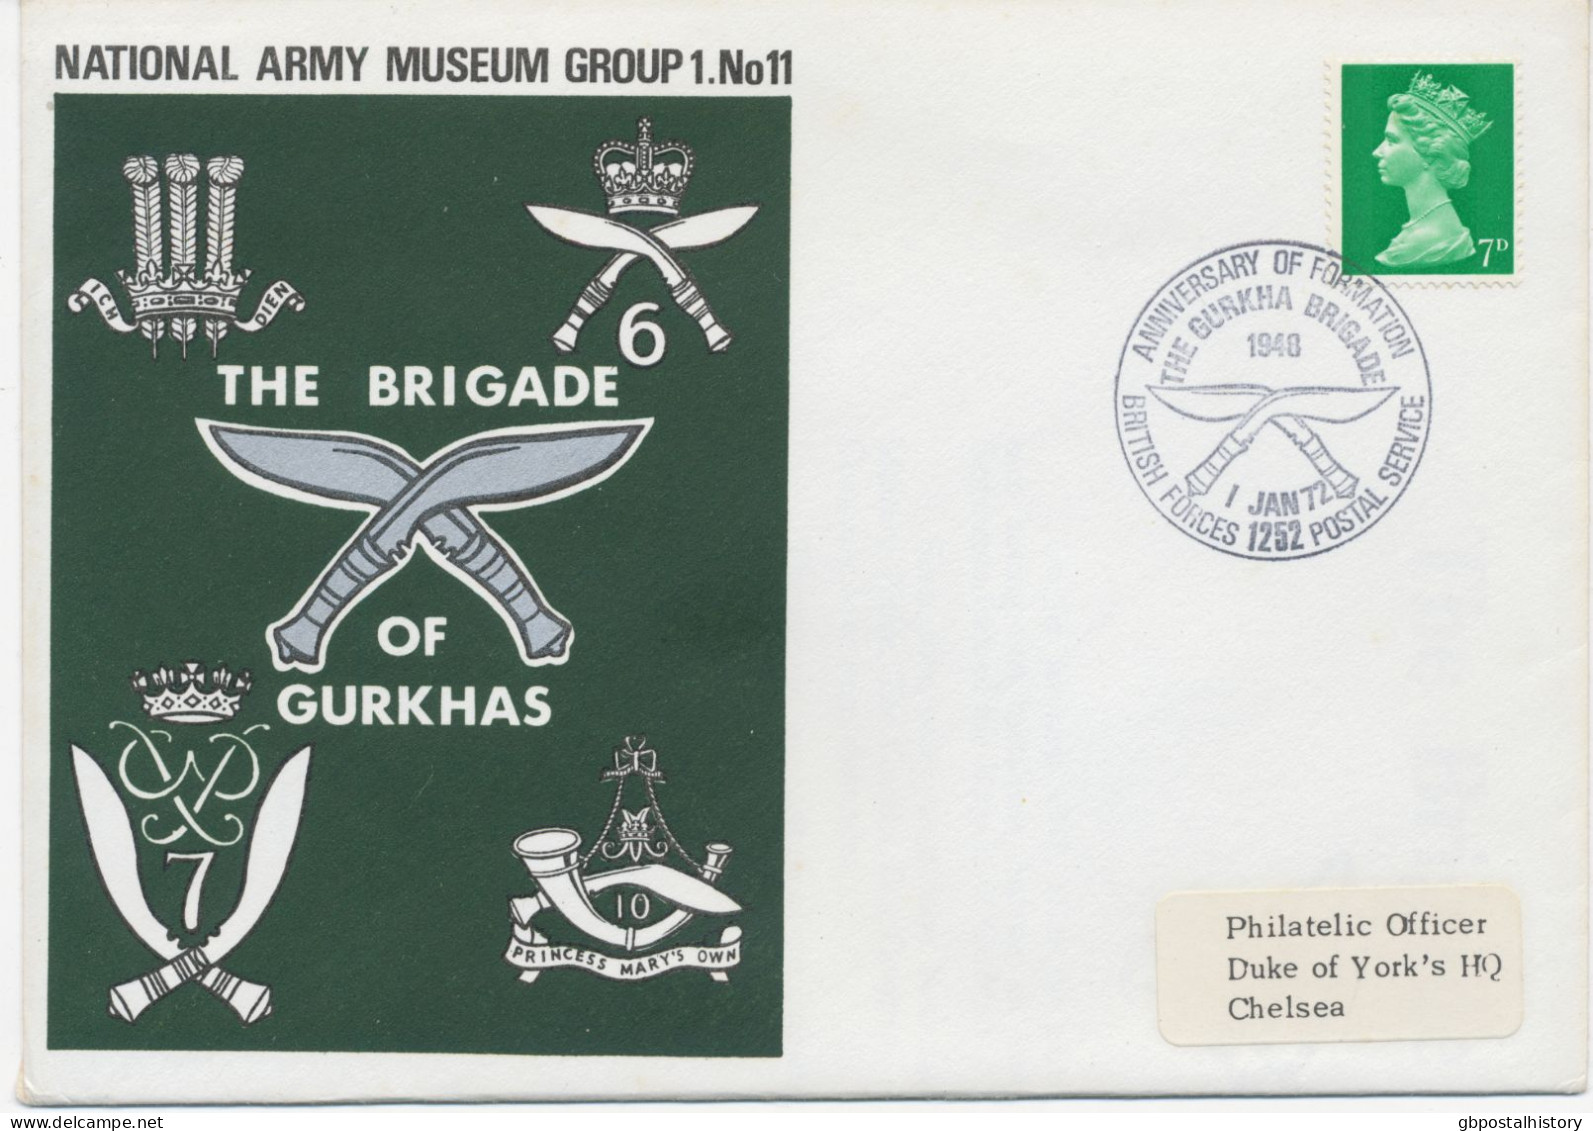 GB SPECIAL EVENT POSTMARK ANNIVERSARY OF FORMATION THE BURKHA BRIGADE 1948 1 JAN 72 BRITISH FORCES 1252 POSTAL SERVICE - Covers & Documents